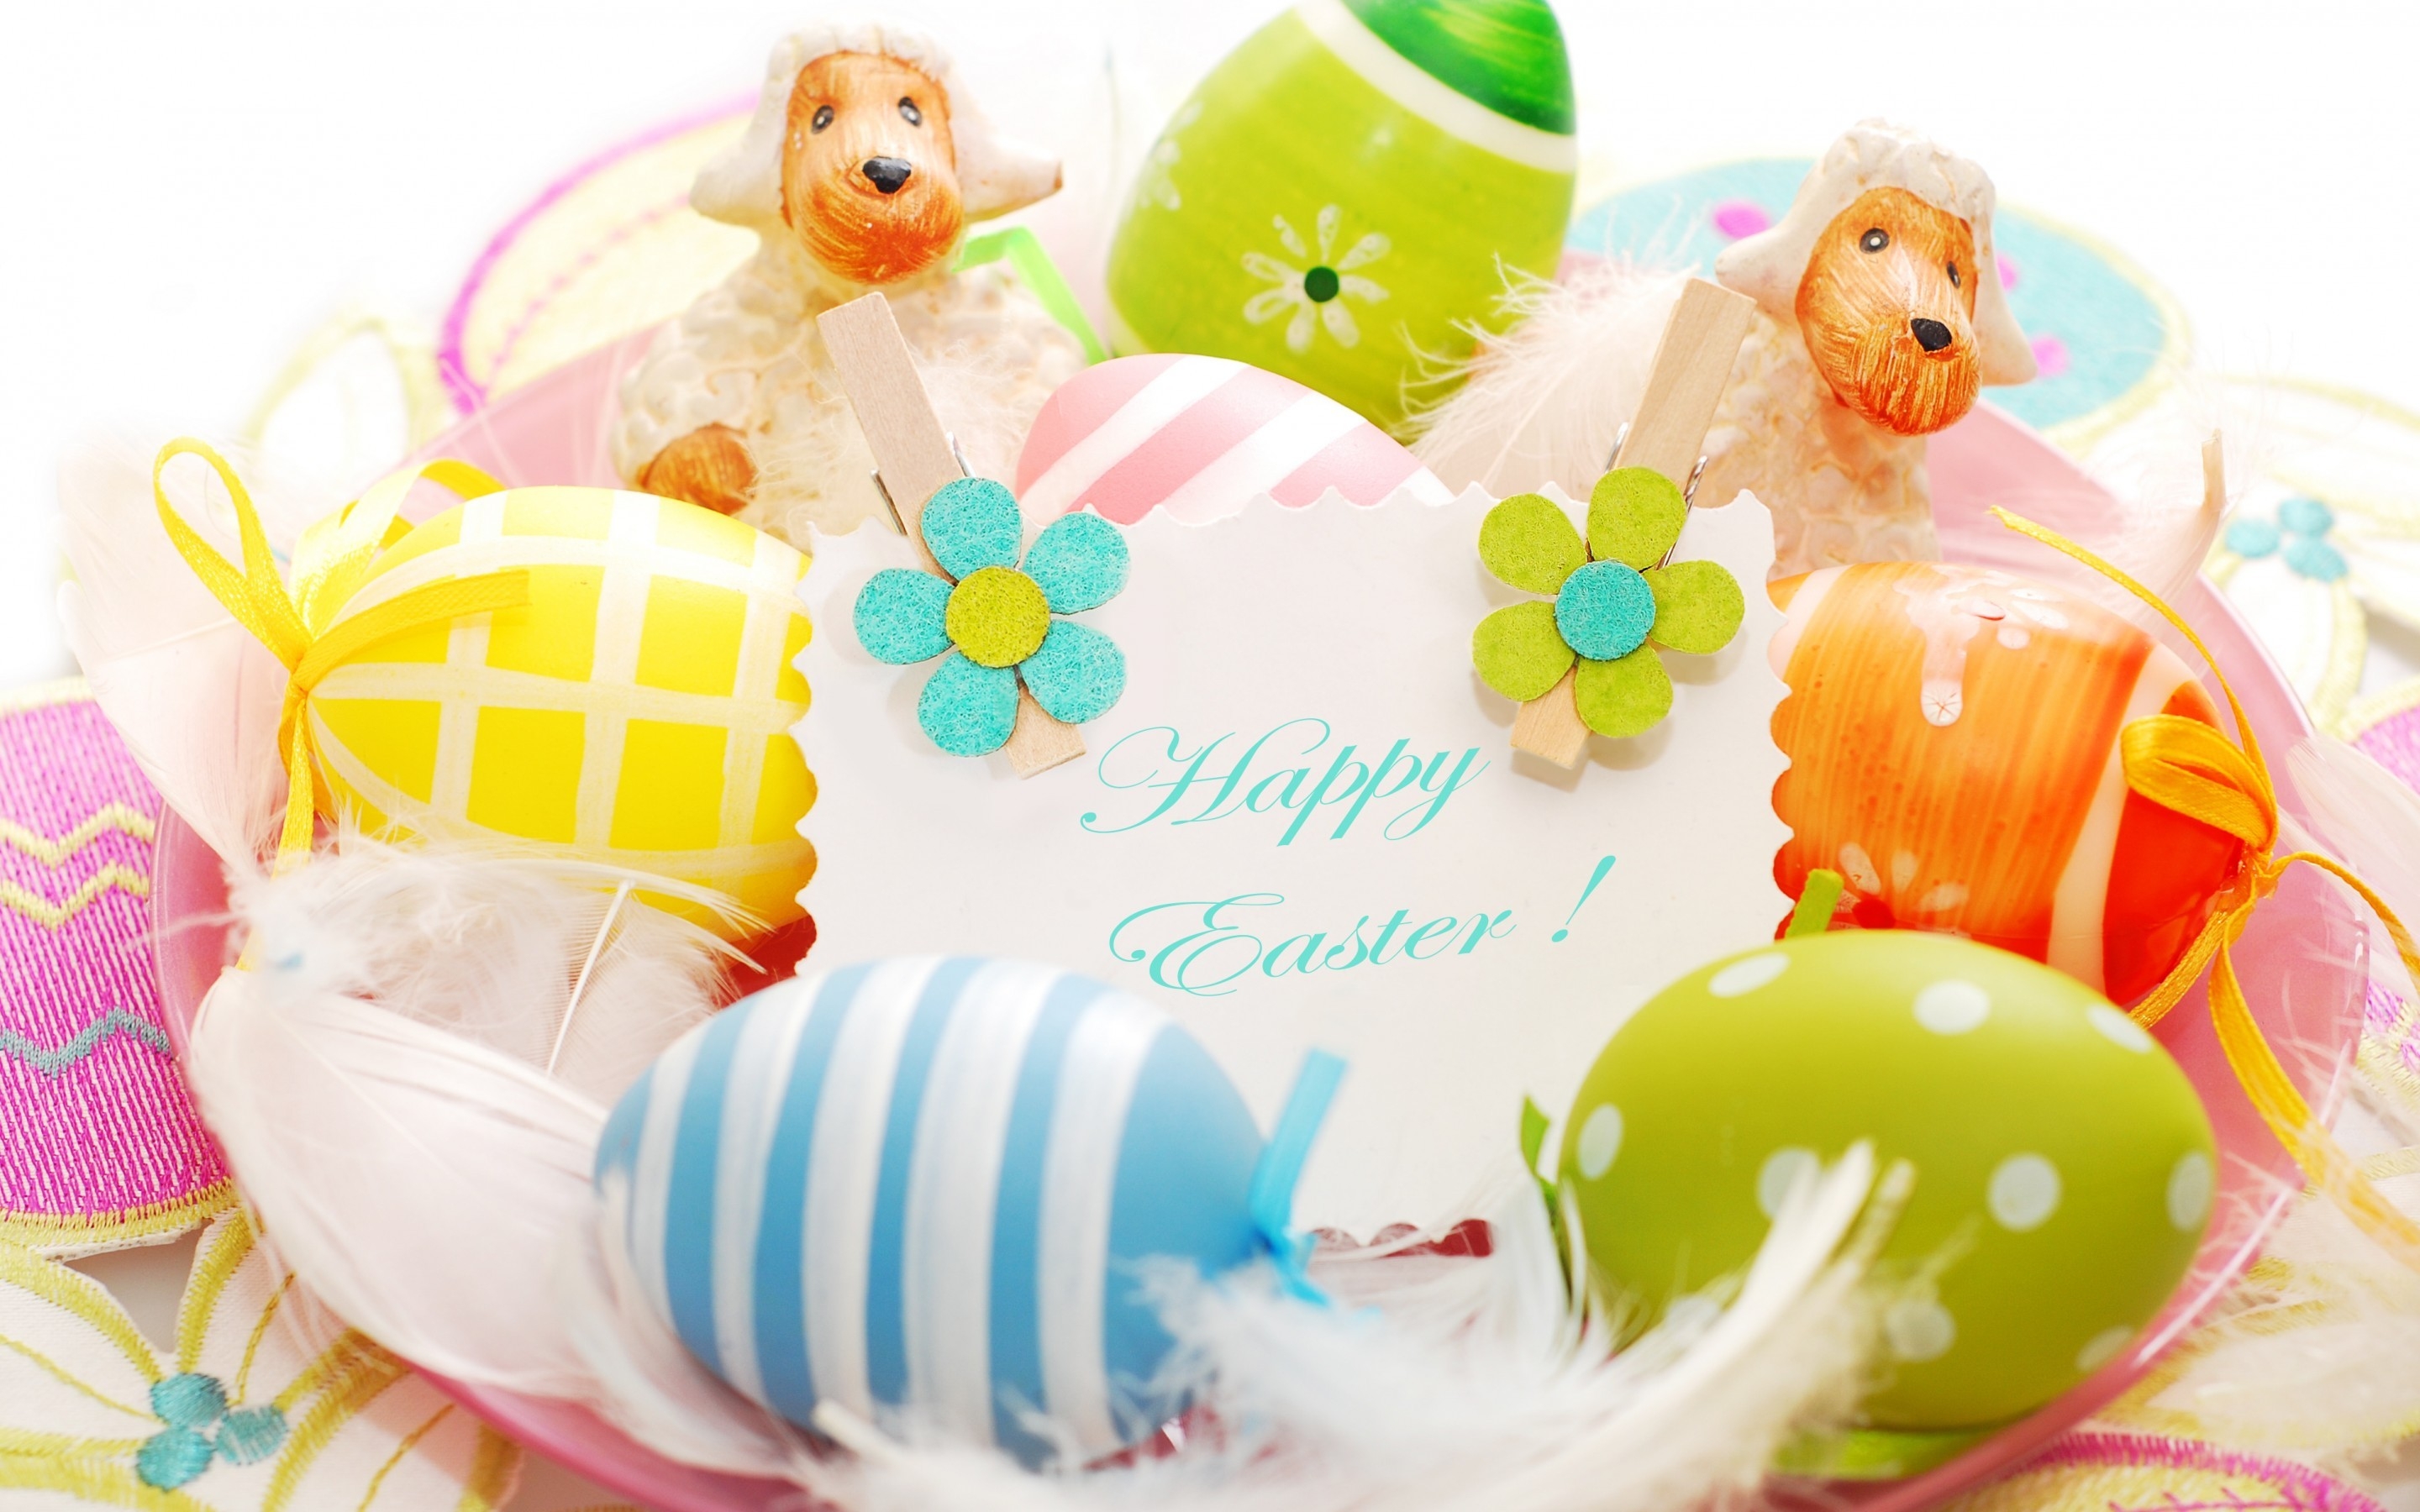 2014 Happy Easter Decorations for 2880 x 1800 Retina Display resolution